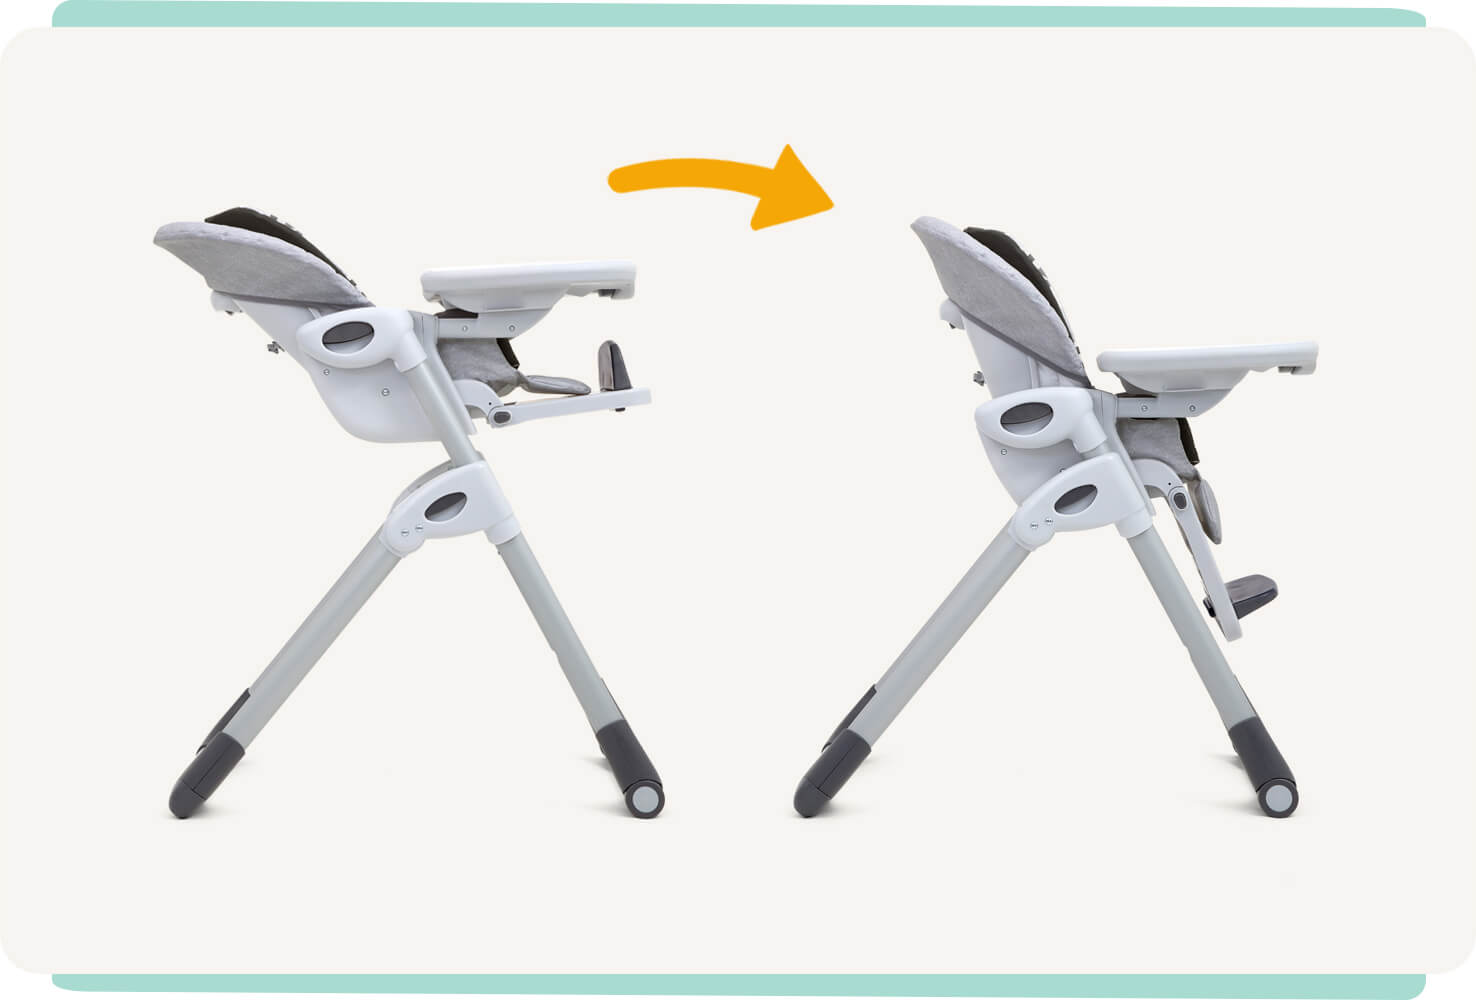  Two gray Joie Mimzy 2in1 highchairs side by side, in profile showing the maximum height on the left and minimum height on the right, with an orange arrow in between.